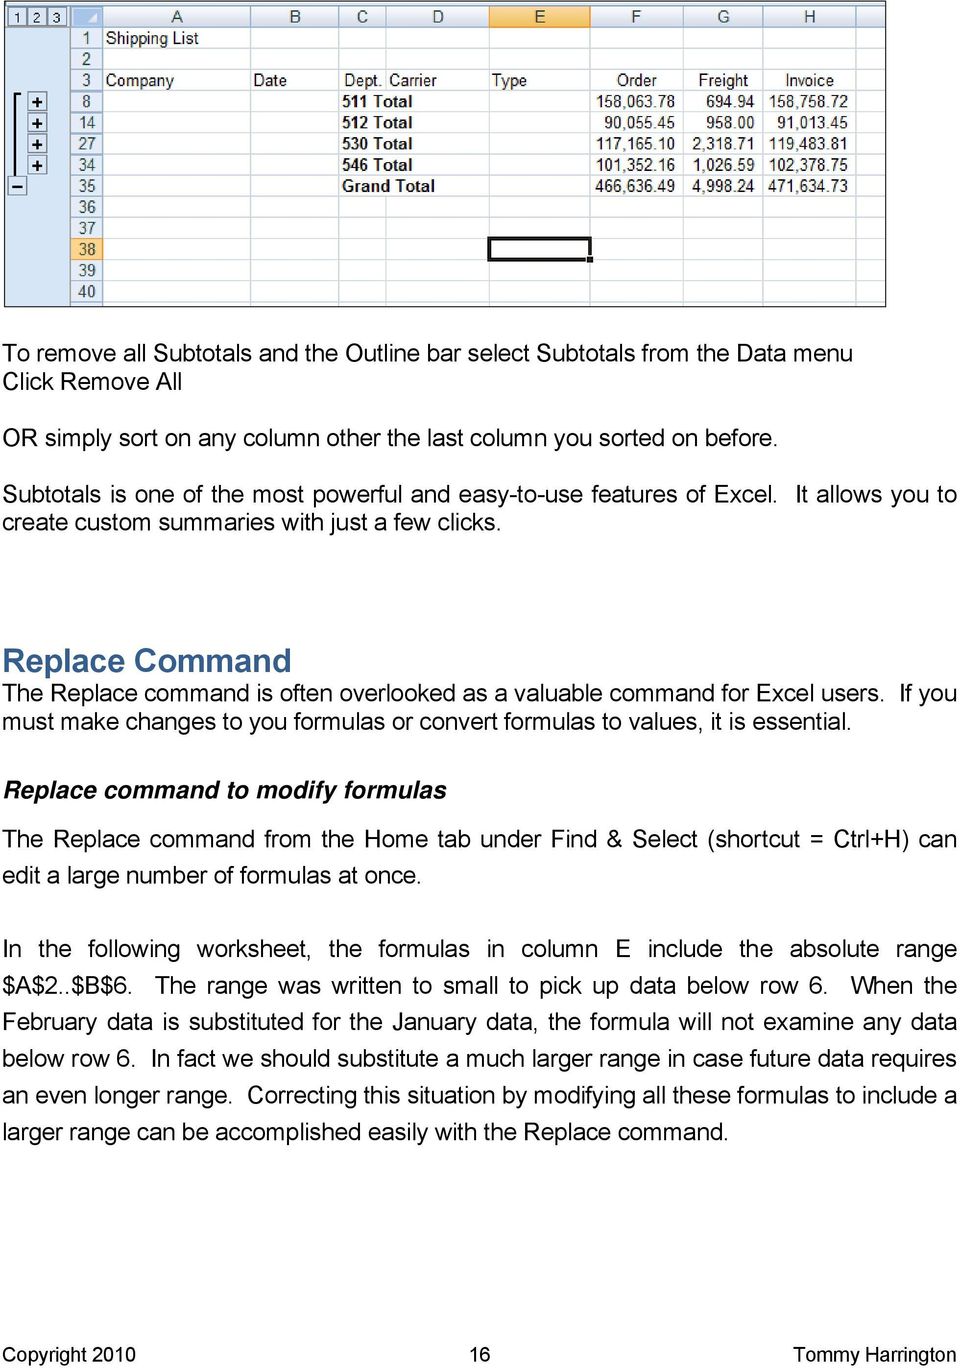 Replace Command The Replace command is often overlooked as a valuable command for Excel users. If you must make changes to you formulas or convert formulas to values, it is essential.